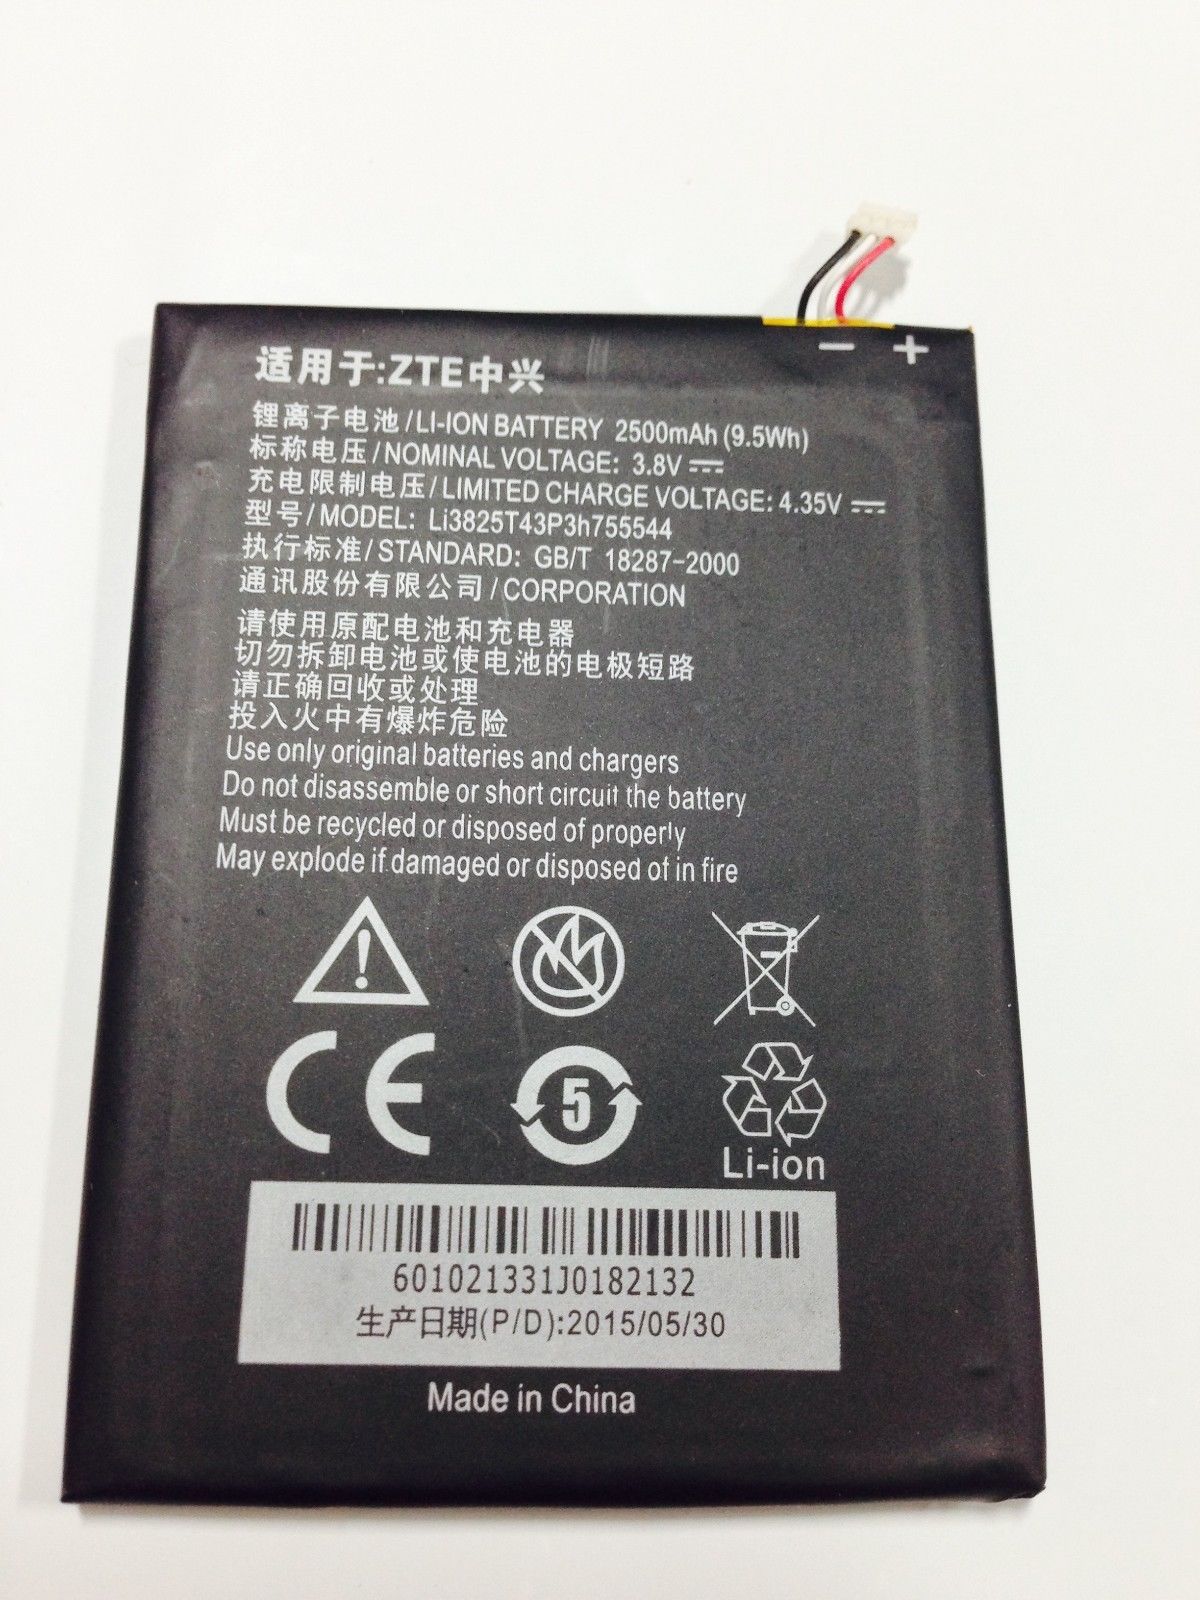 TELSTRA ZTE REPLACEMENT BATTERY SUIT ZTE T83 U956 DAVE 2500MAH